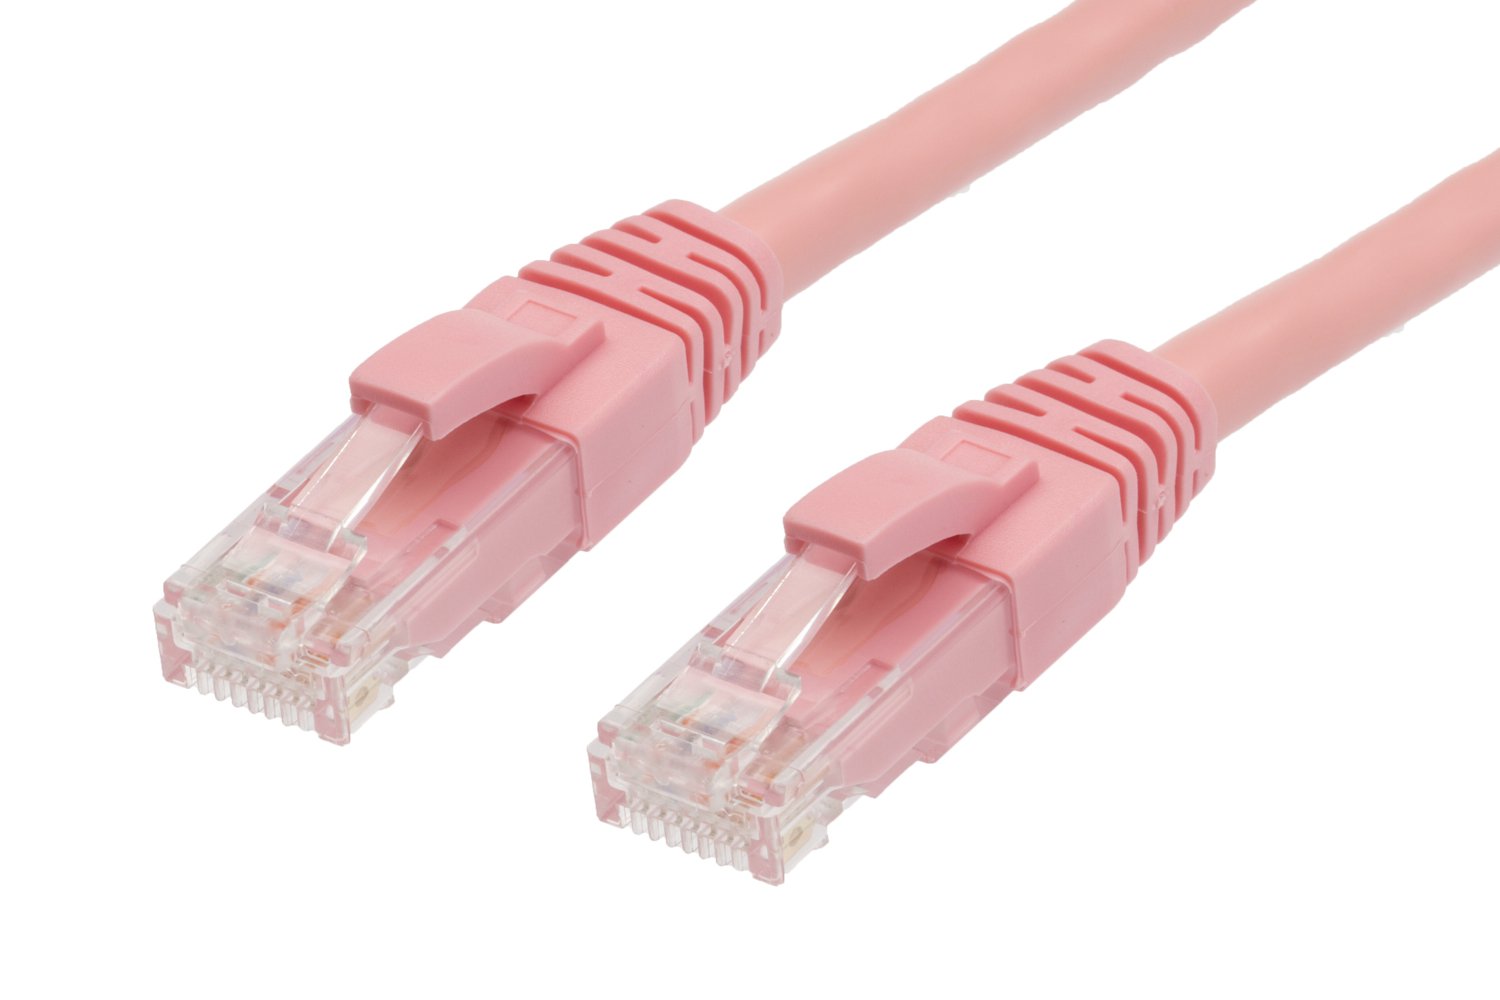 004.001.7003 4cabling 1m Cat 5e Ethernet Network Cable: Pink 004.001.7003